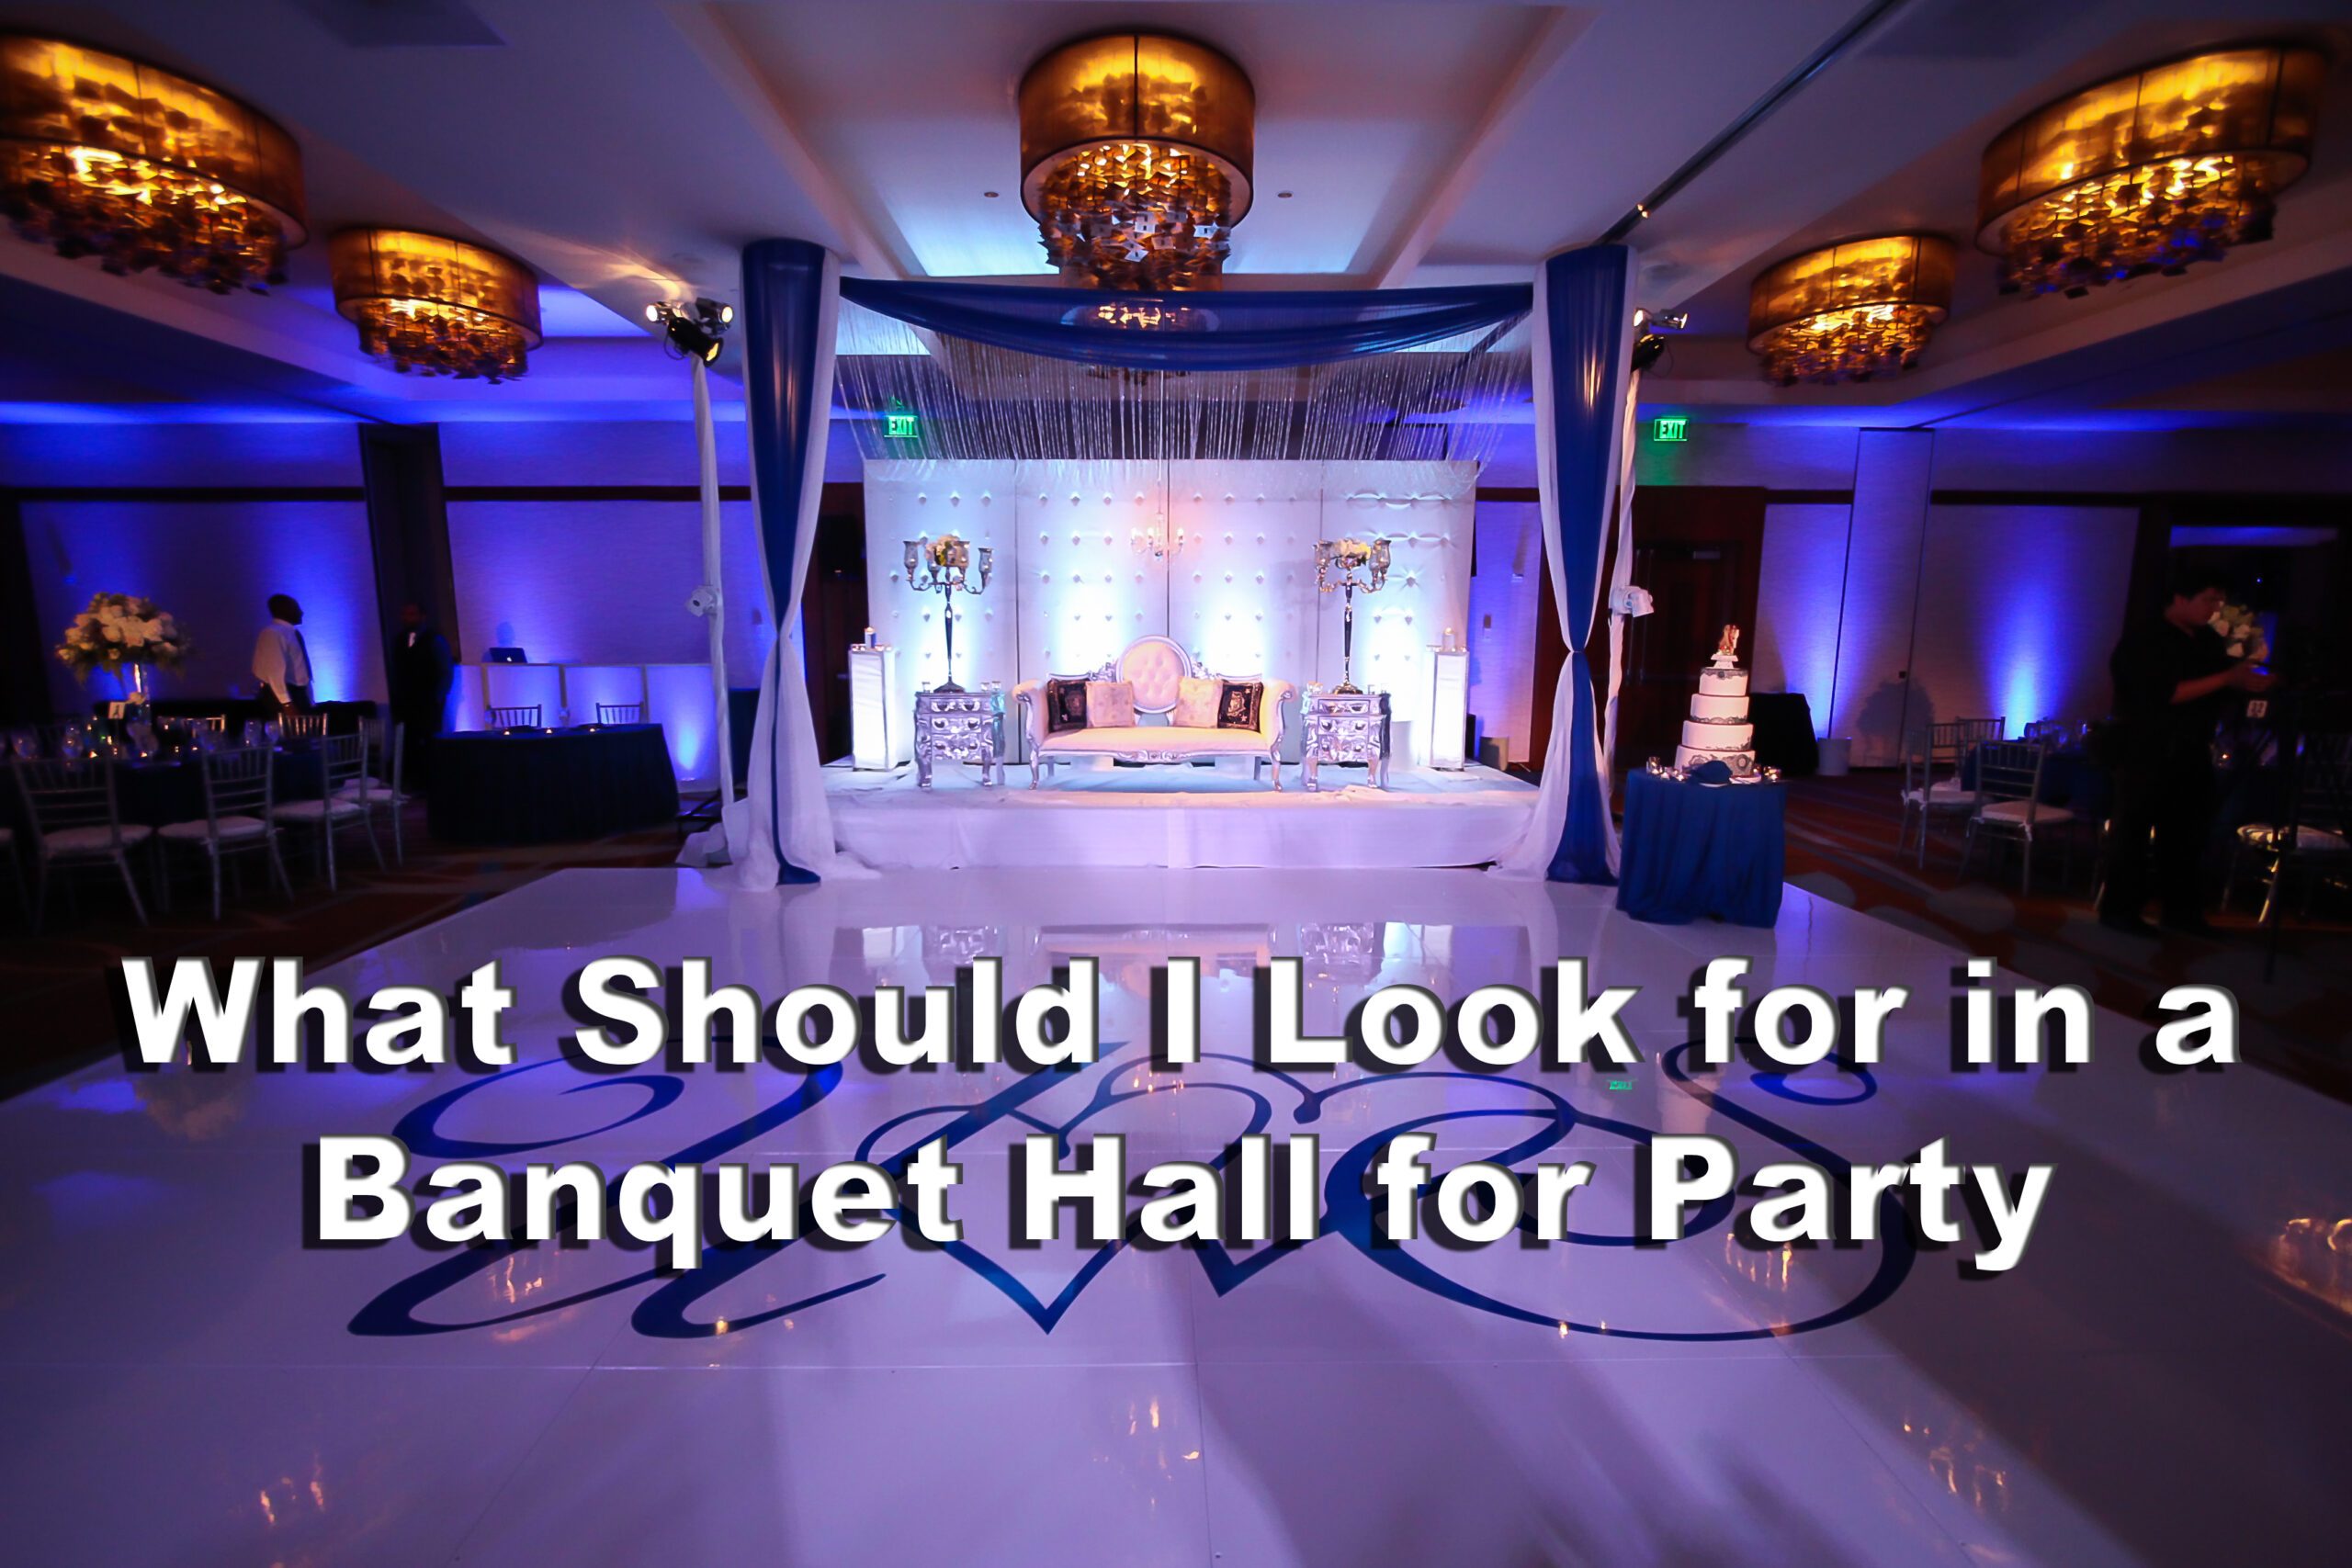 What should I look for in a banquet hall for party